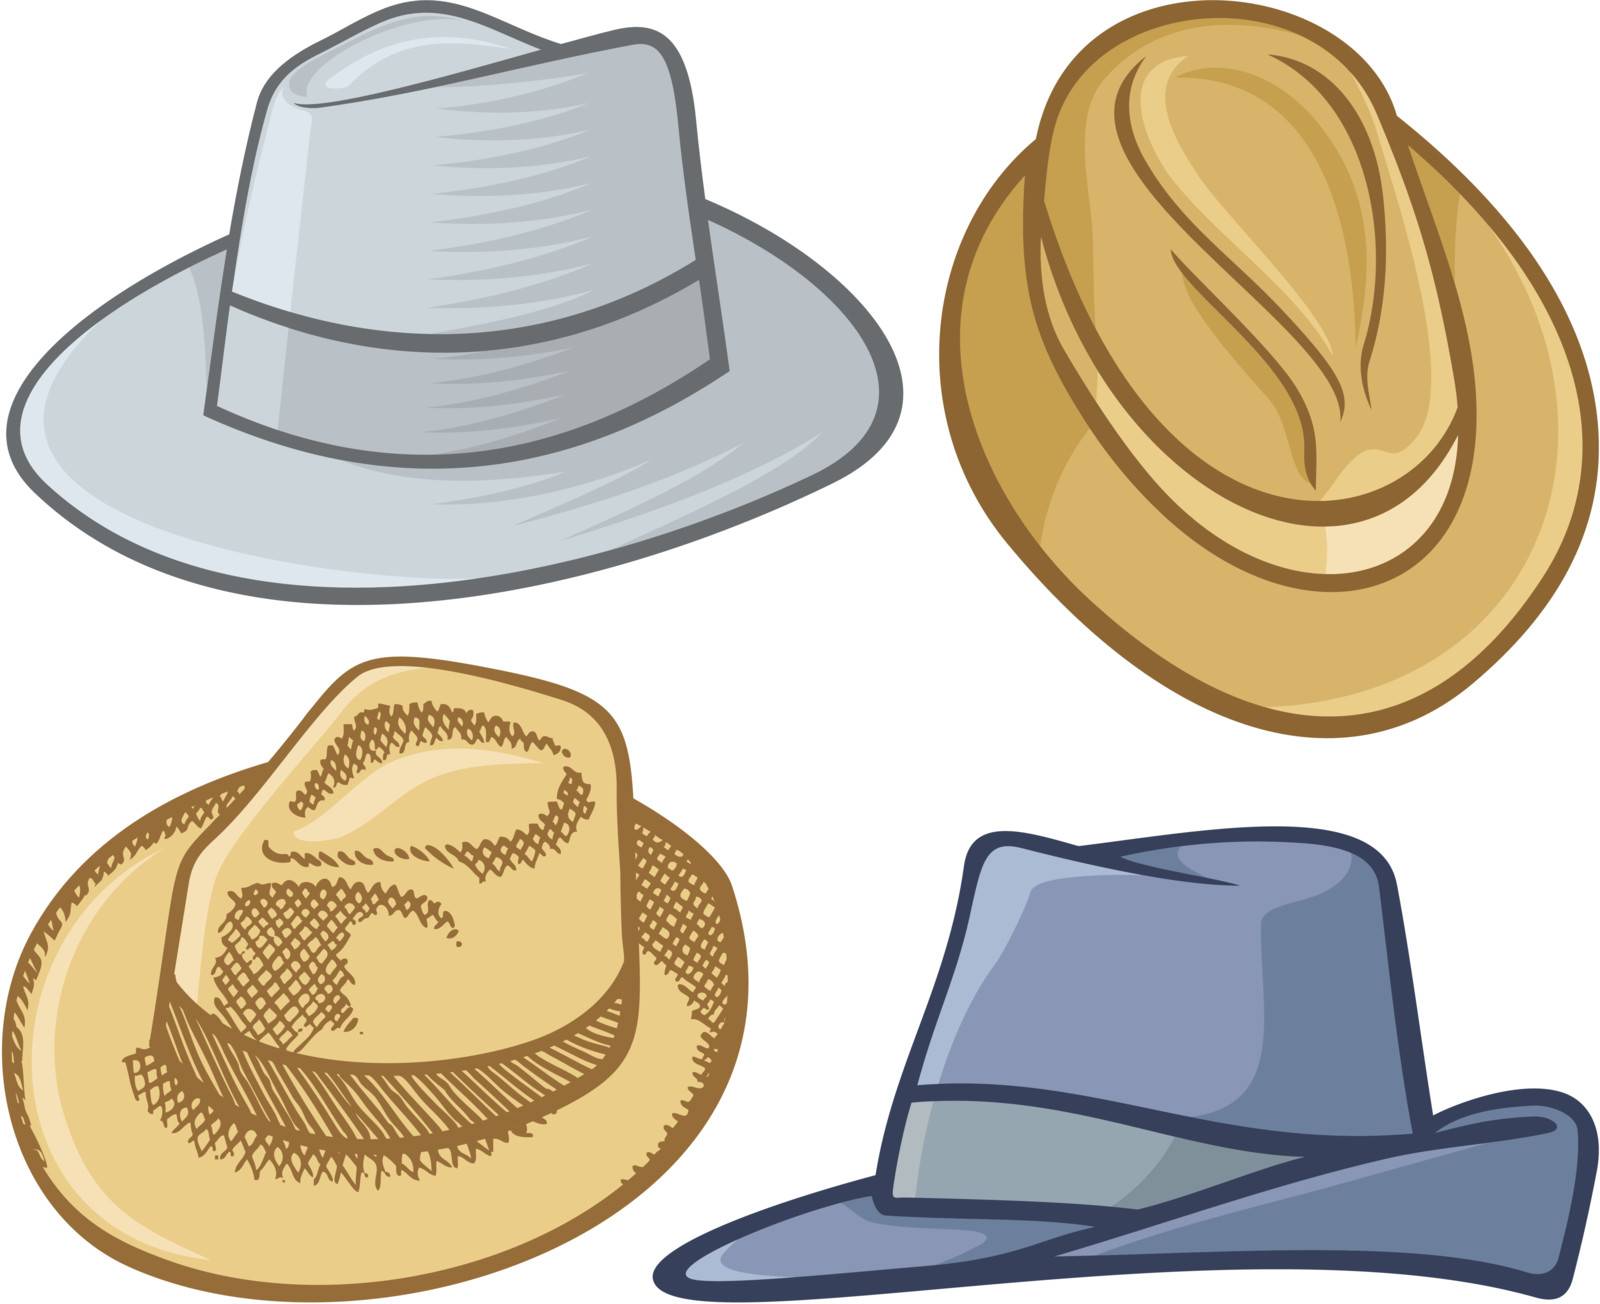 Fedora hats by sifis